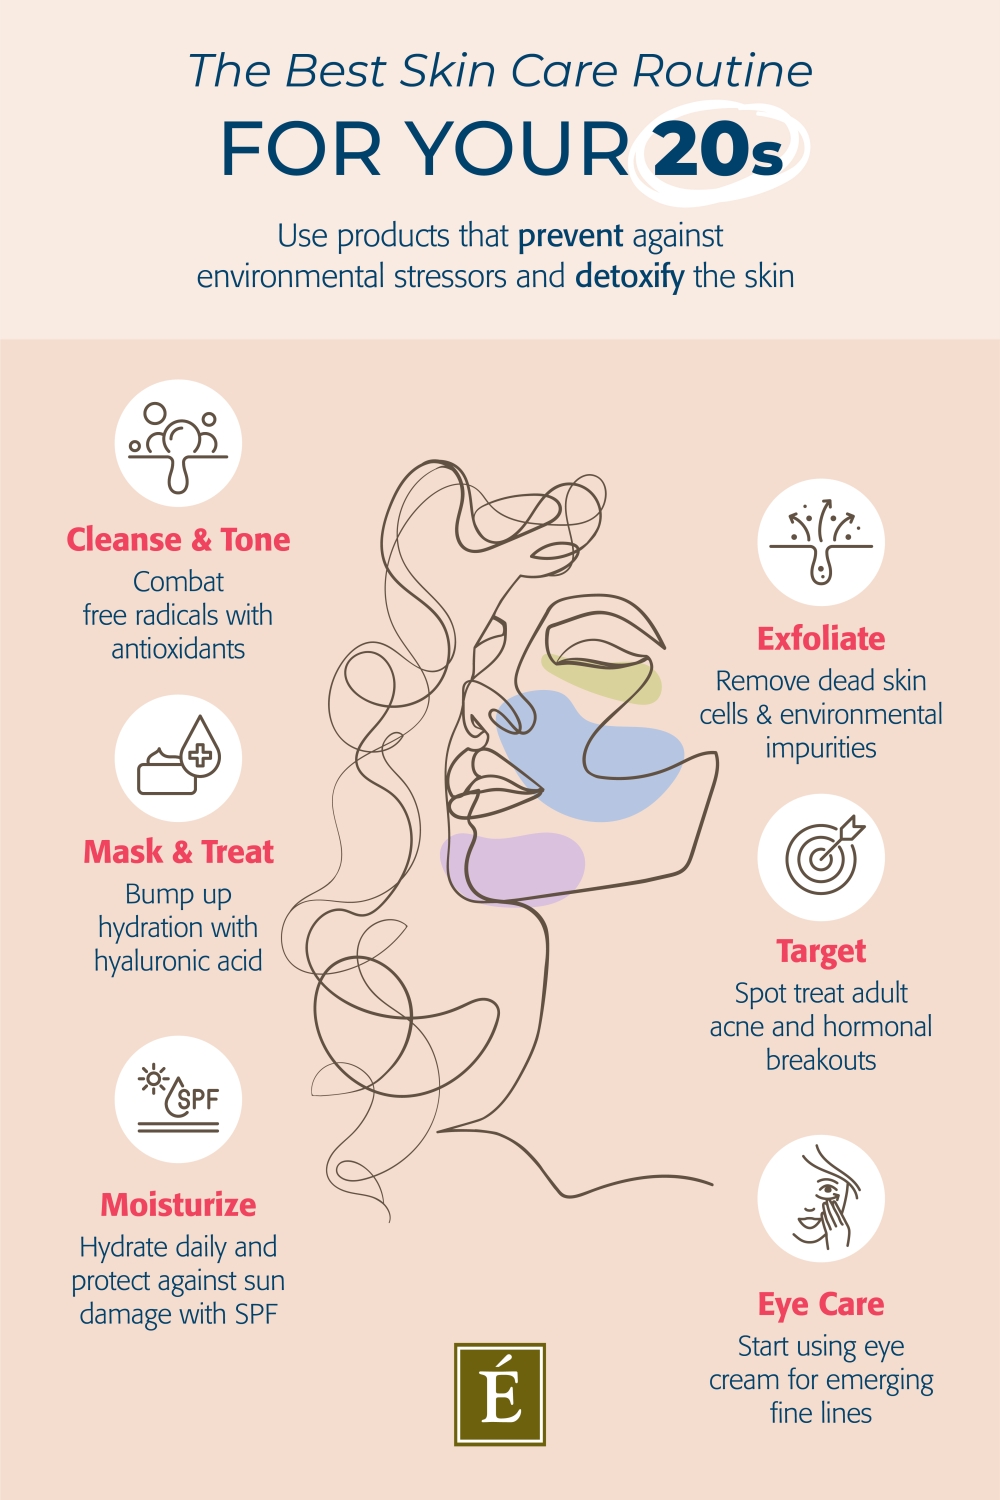 Skin Care Routine For Your 20s